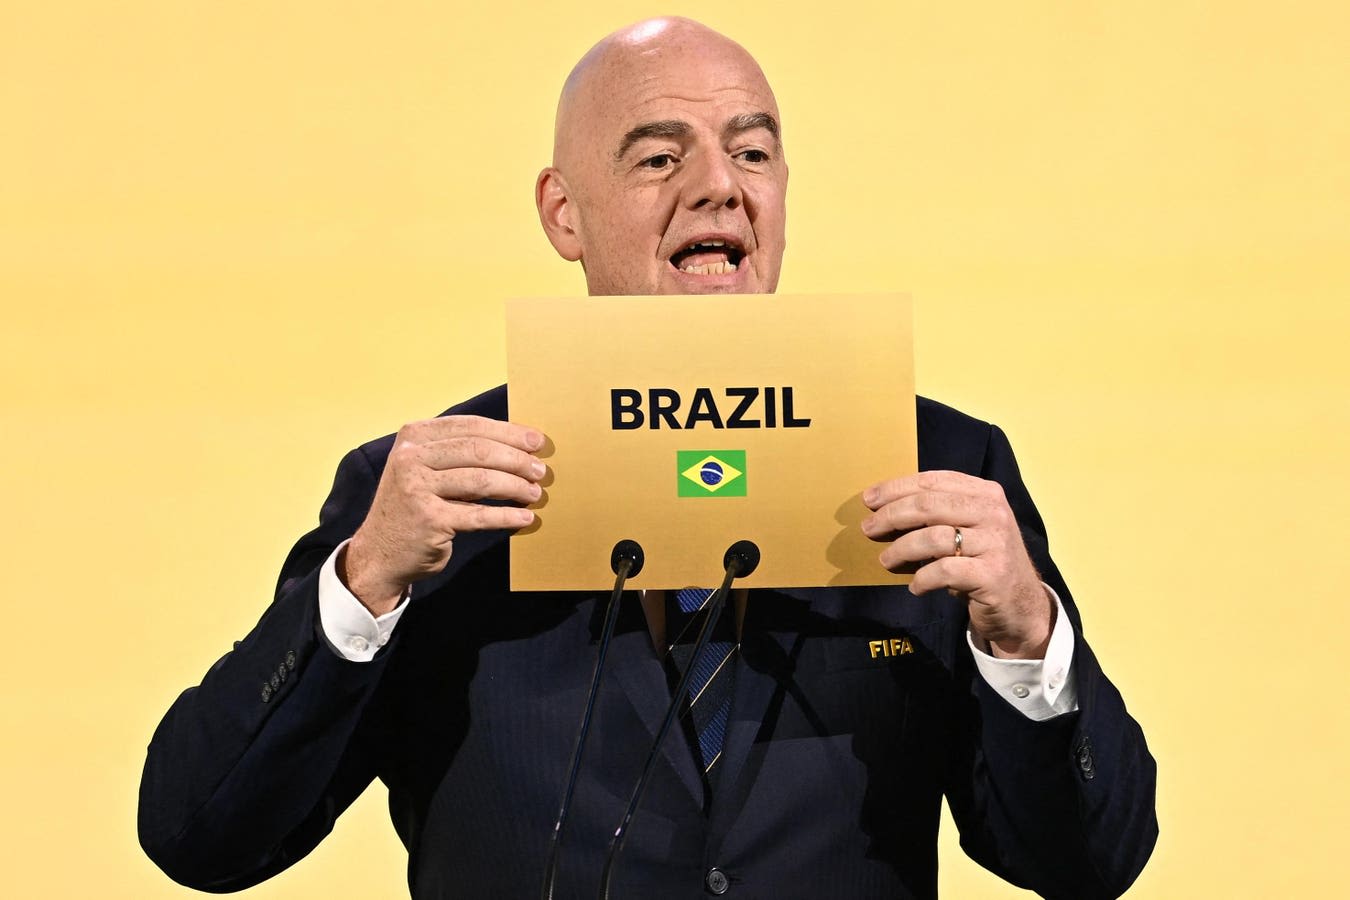 What Will The 2027 FIFA Women’s World Cup In Brazil Look Like